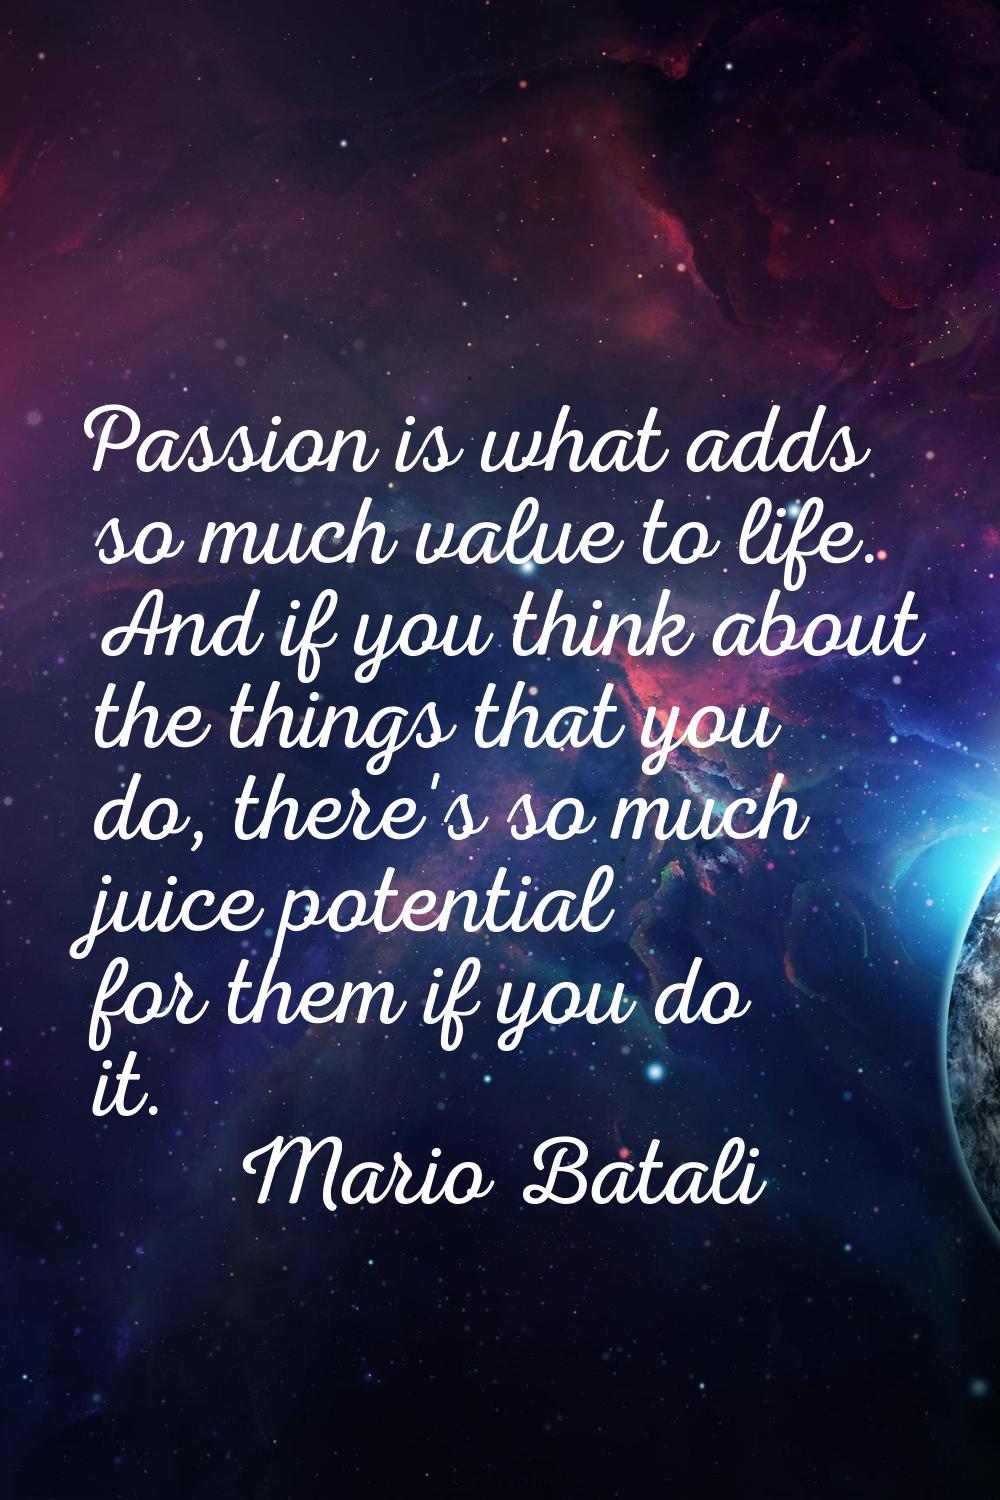 Passion is what adds so much value to life. And if you think about the things that you do, there's 